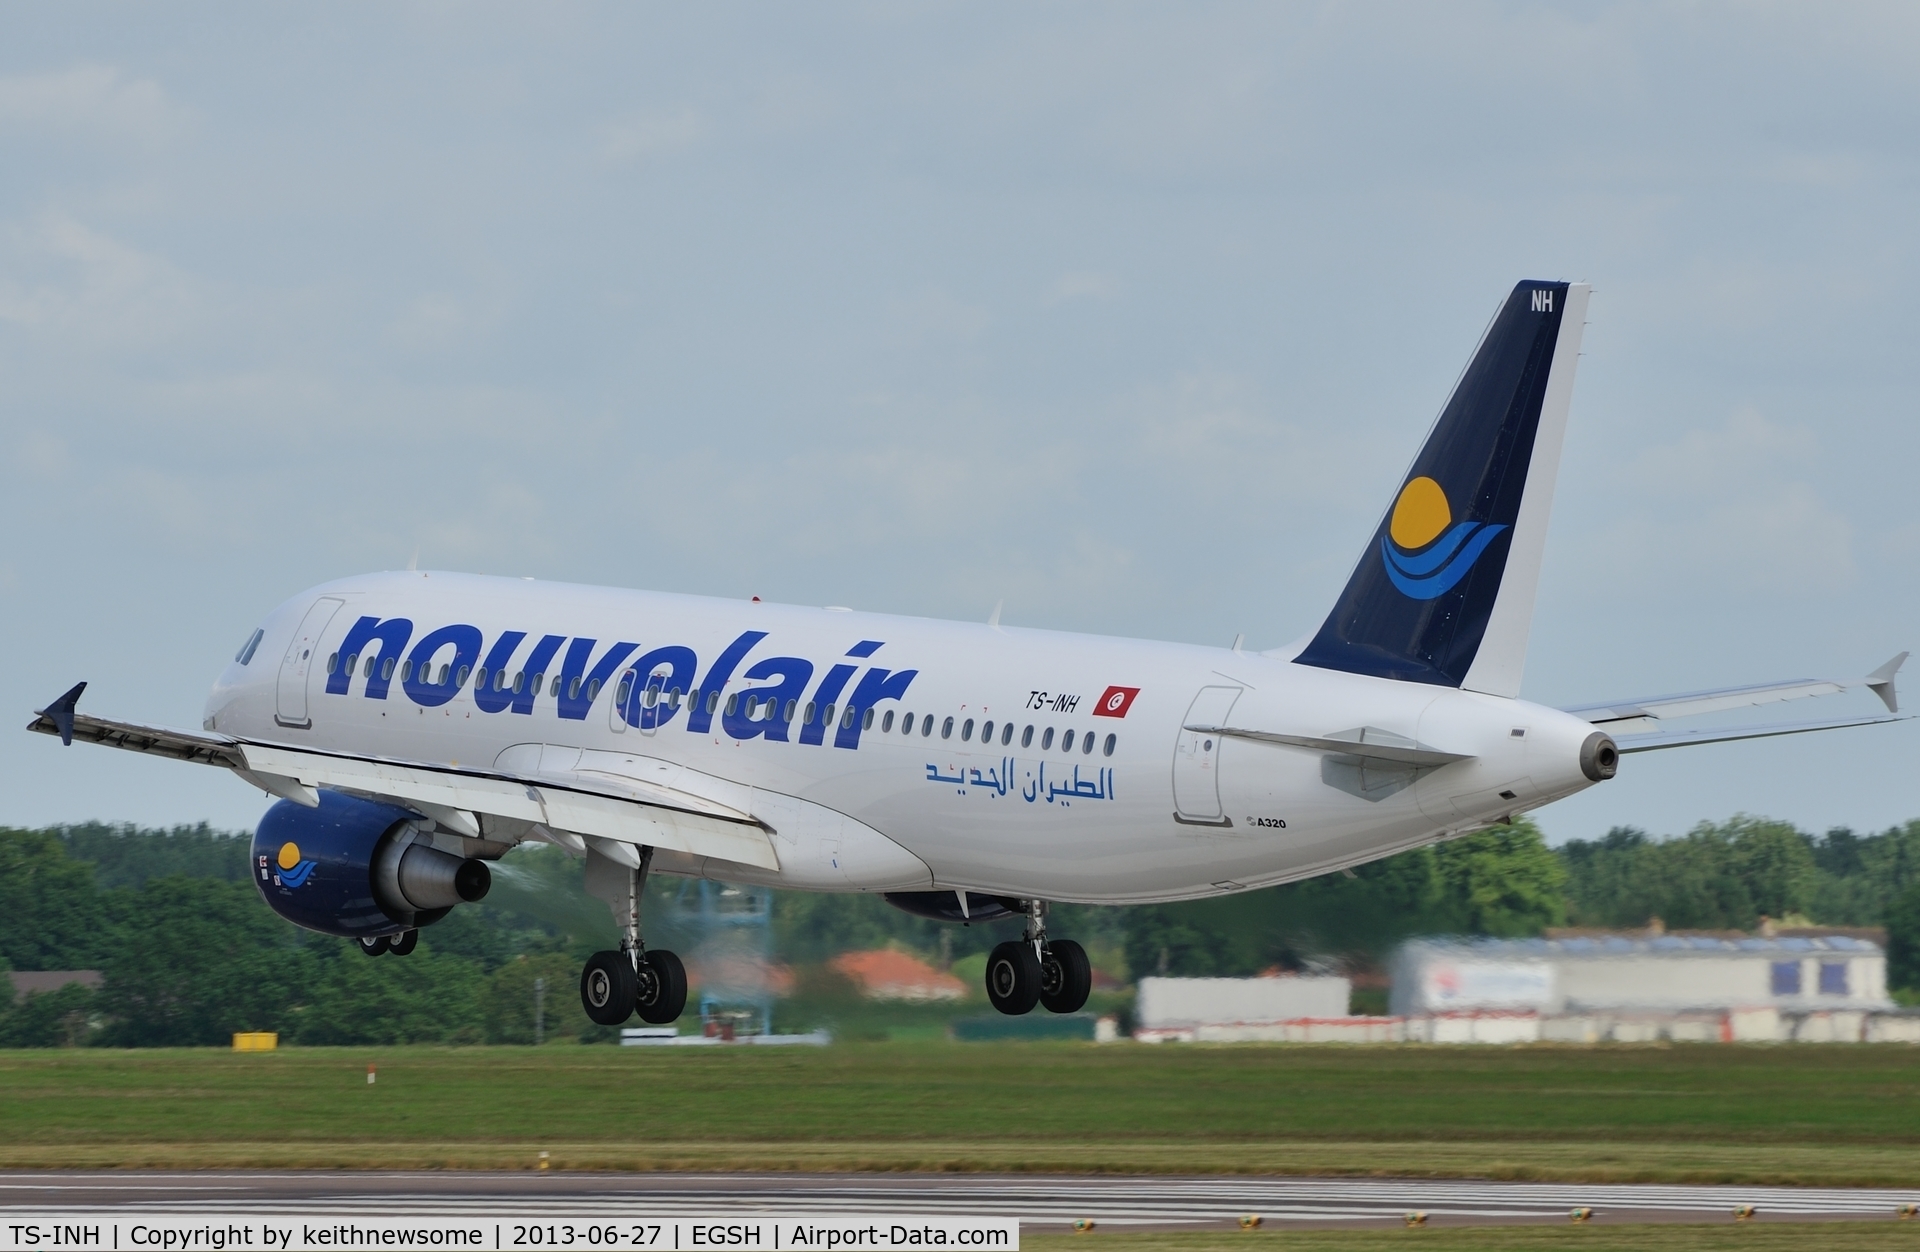 TS-INH, 1991 Airbus A320-211 C/N 157, Arriving onto runway 27 !